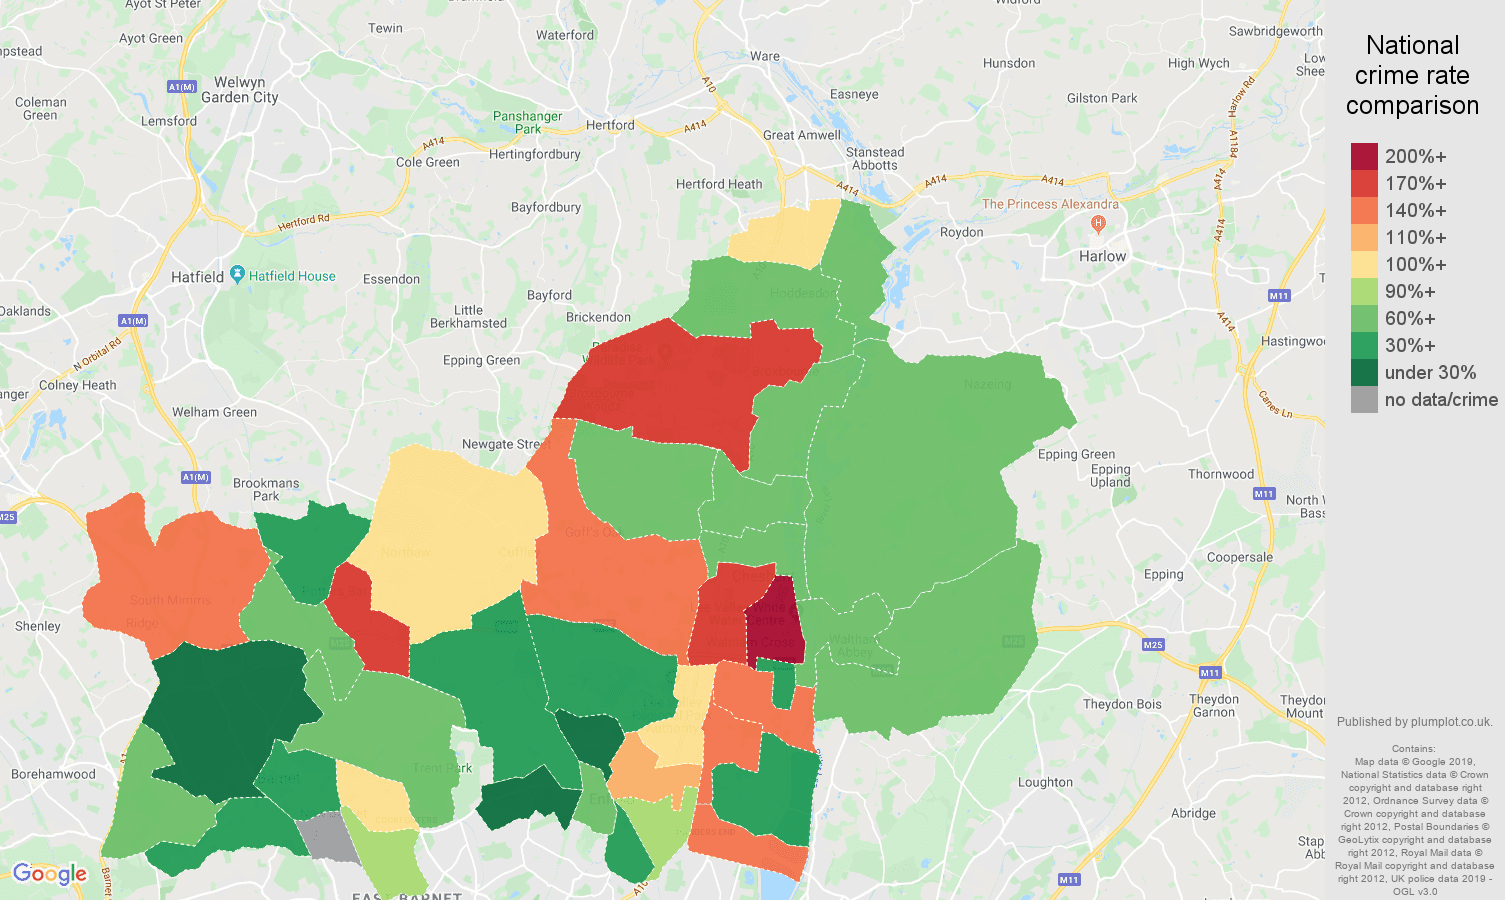 Enfield possession of weapons crime rate comparison map